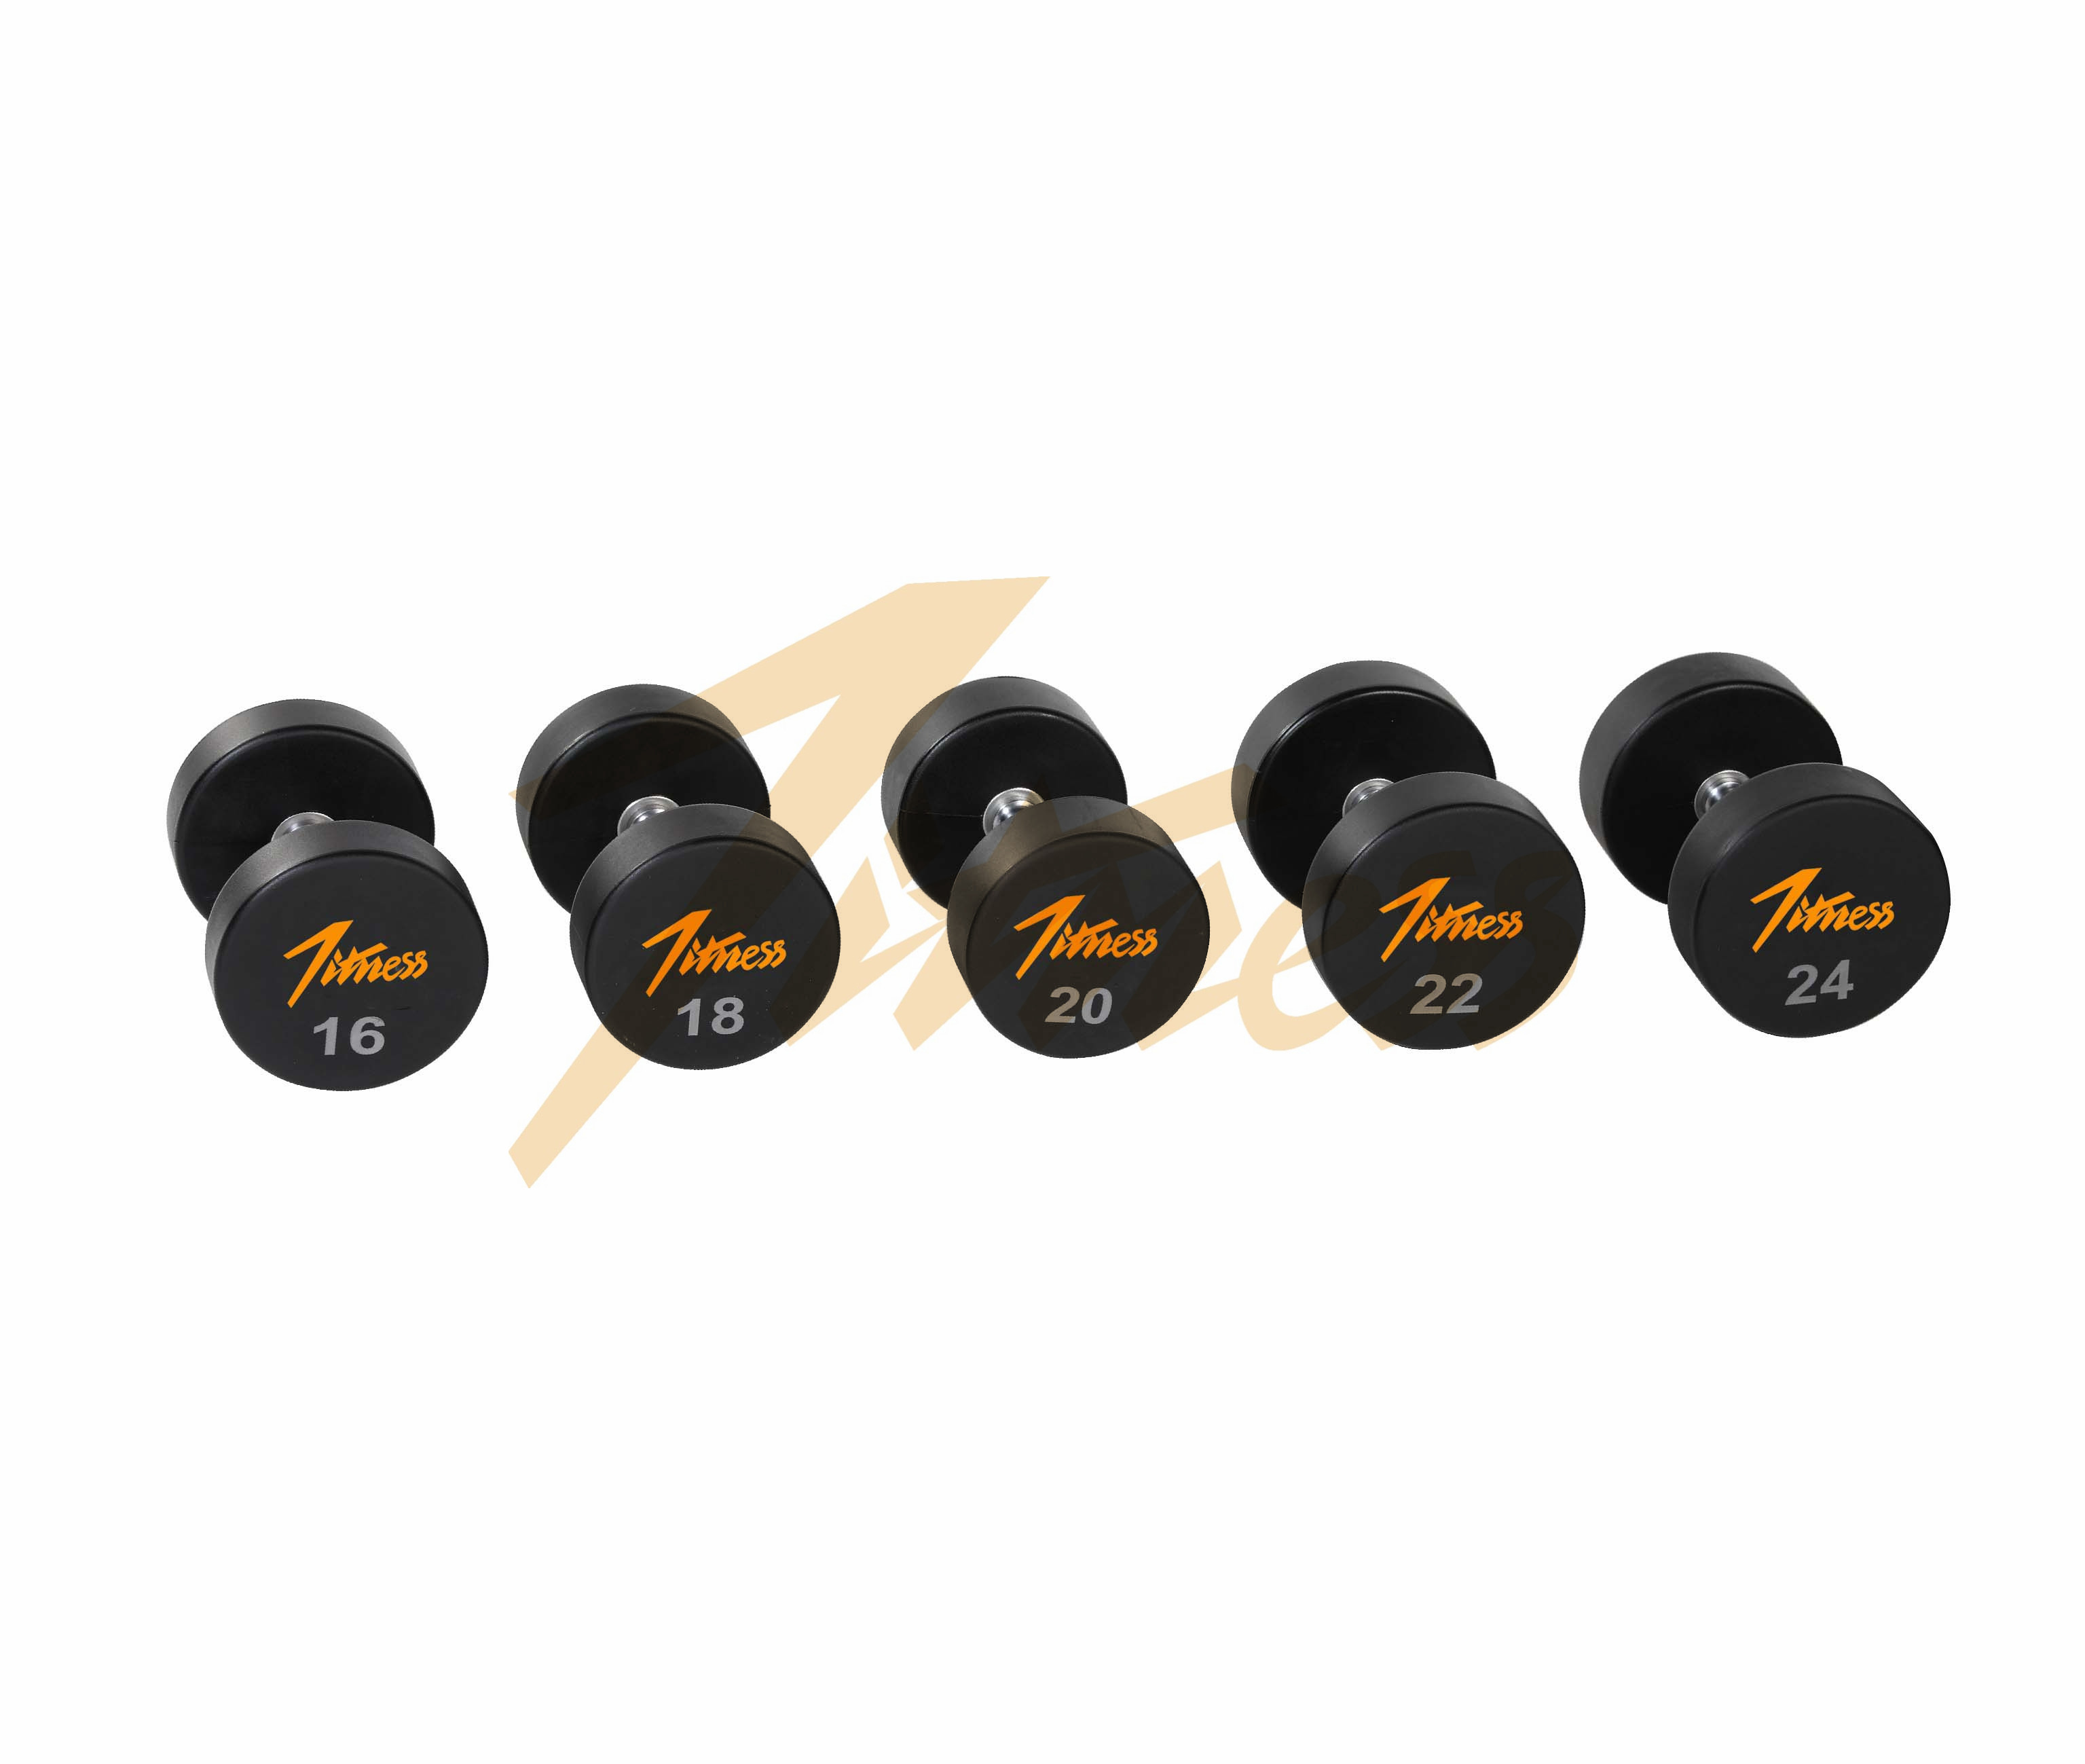 ROUND HEAD PU DUMBBELL